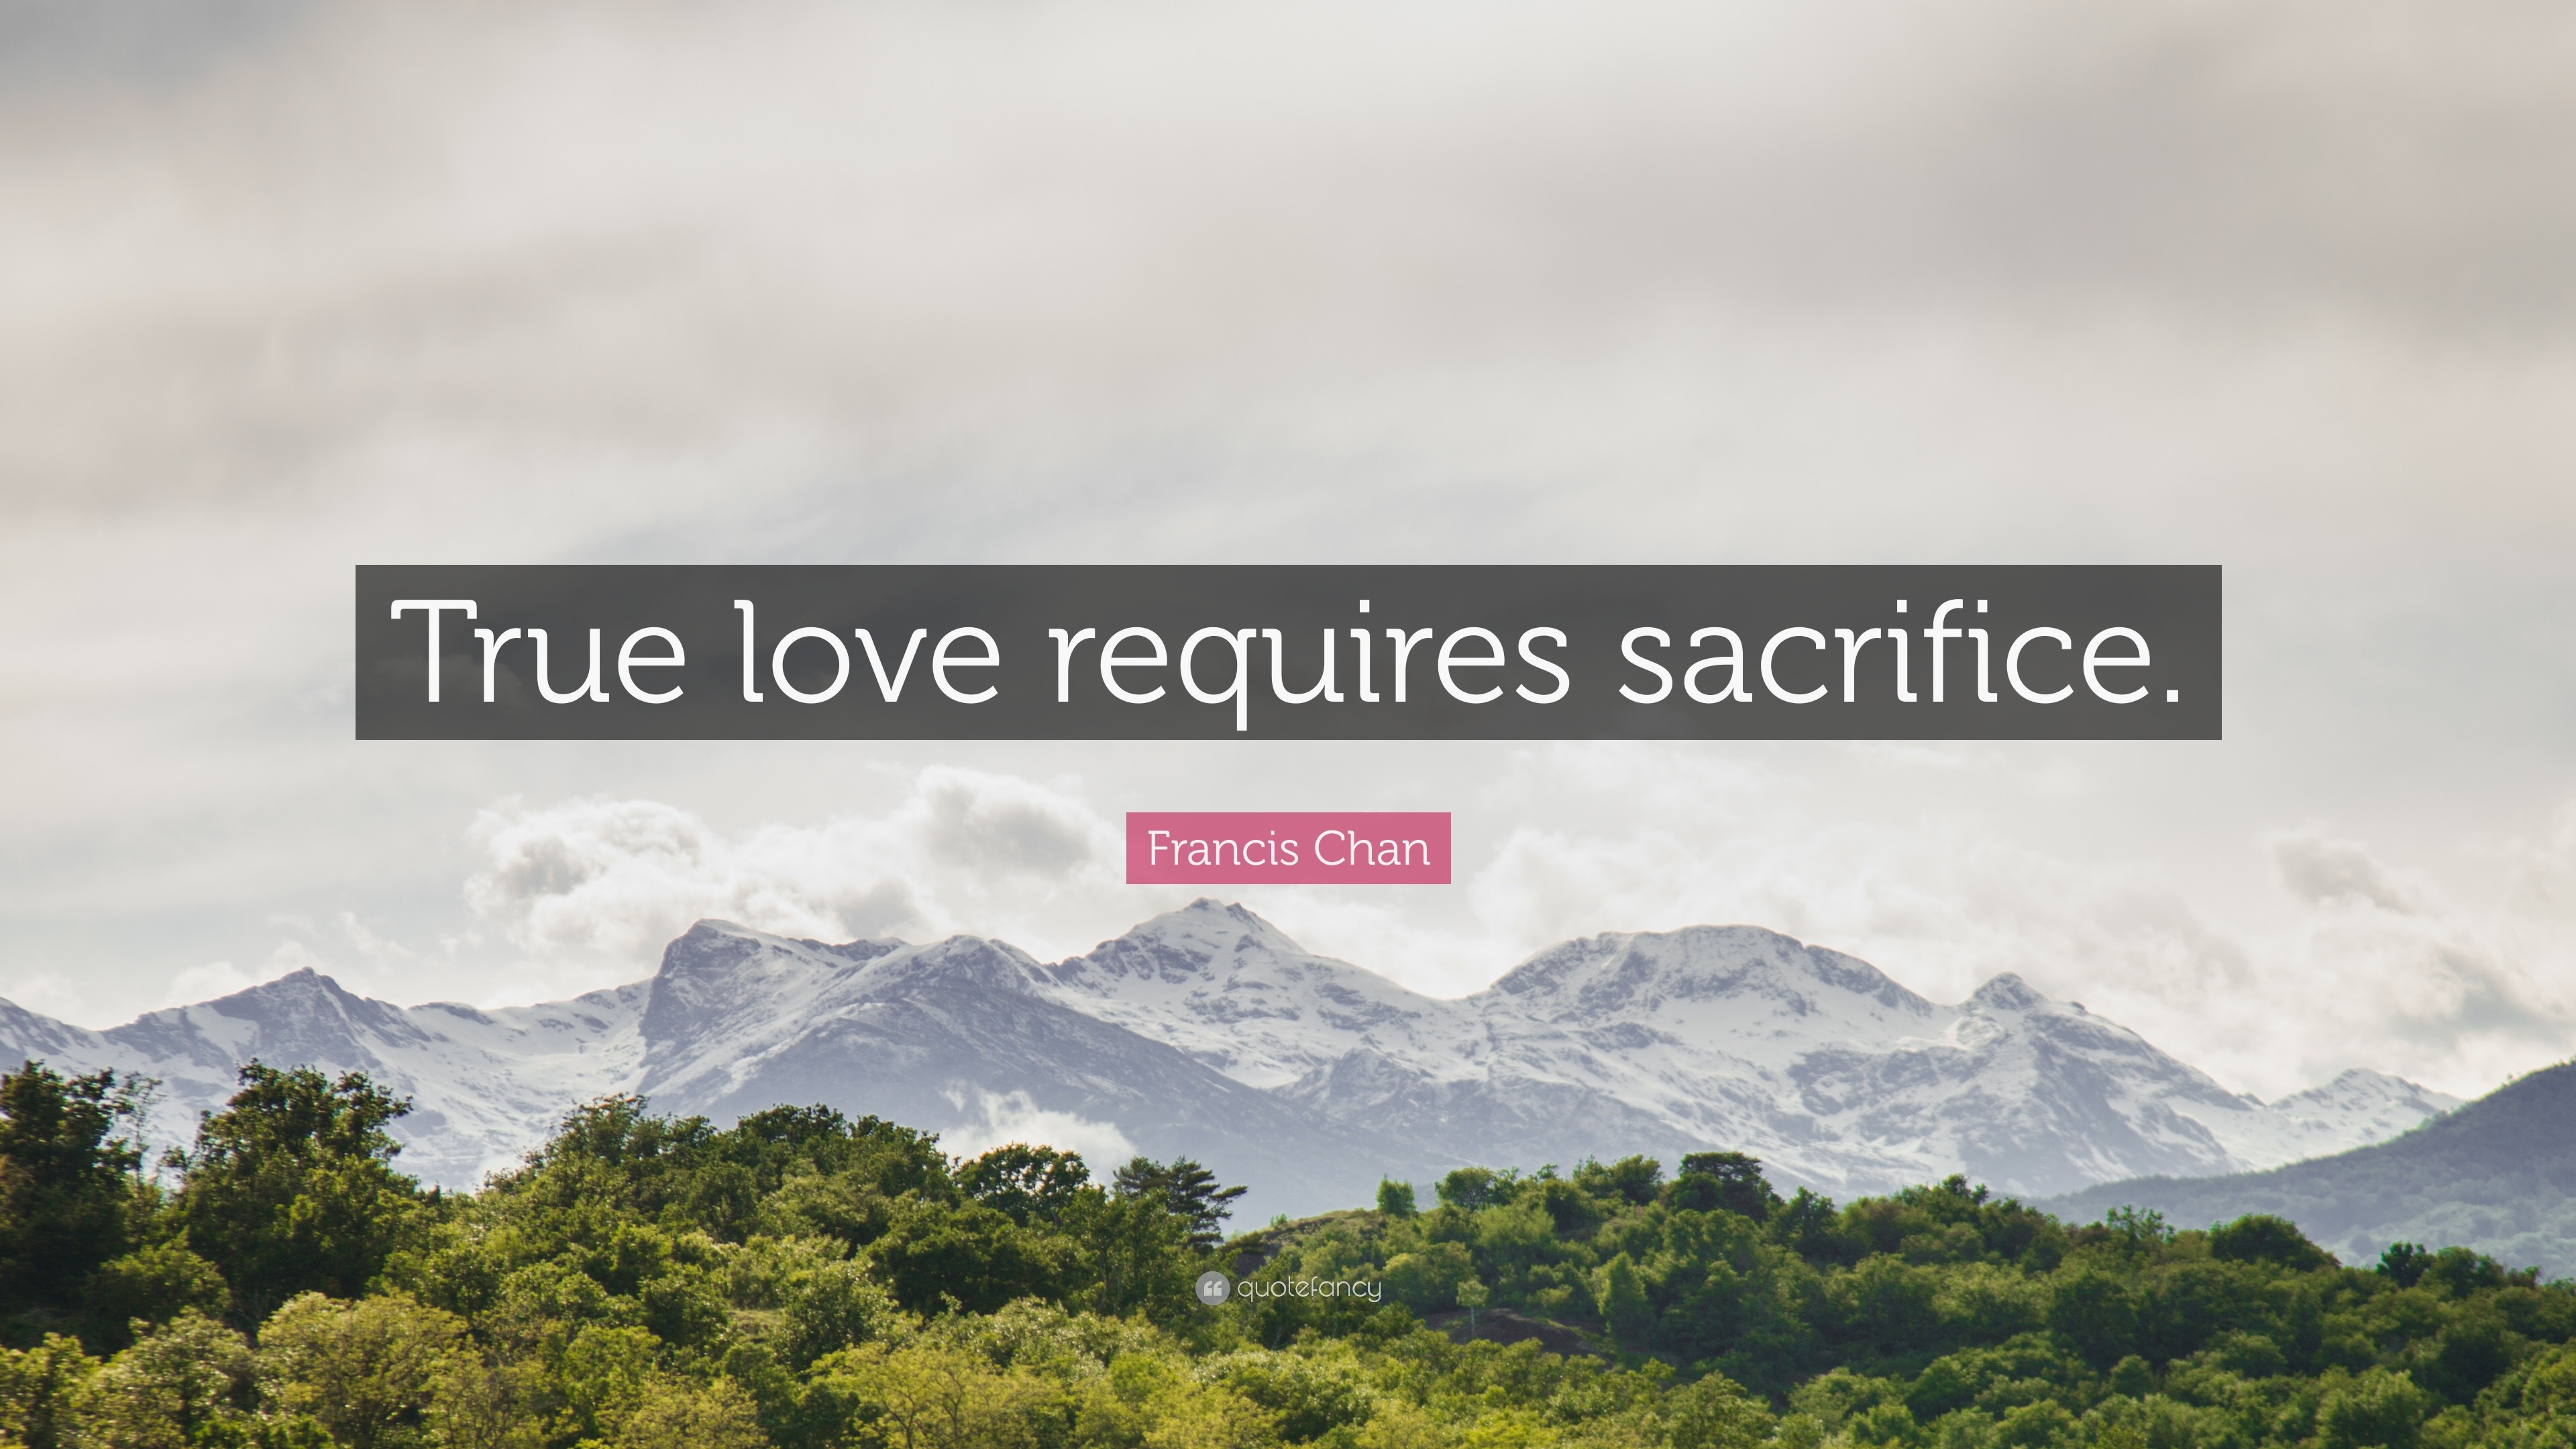 Francis Chan Quote “True love requires sacrifice ”